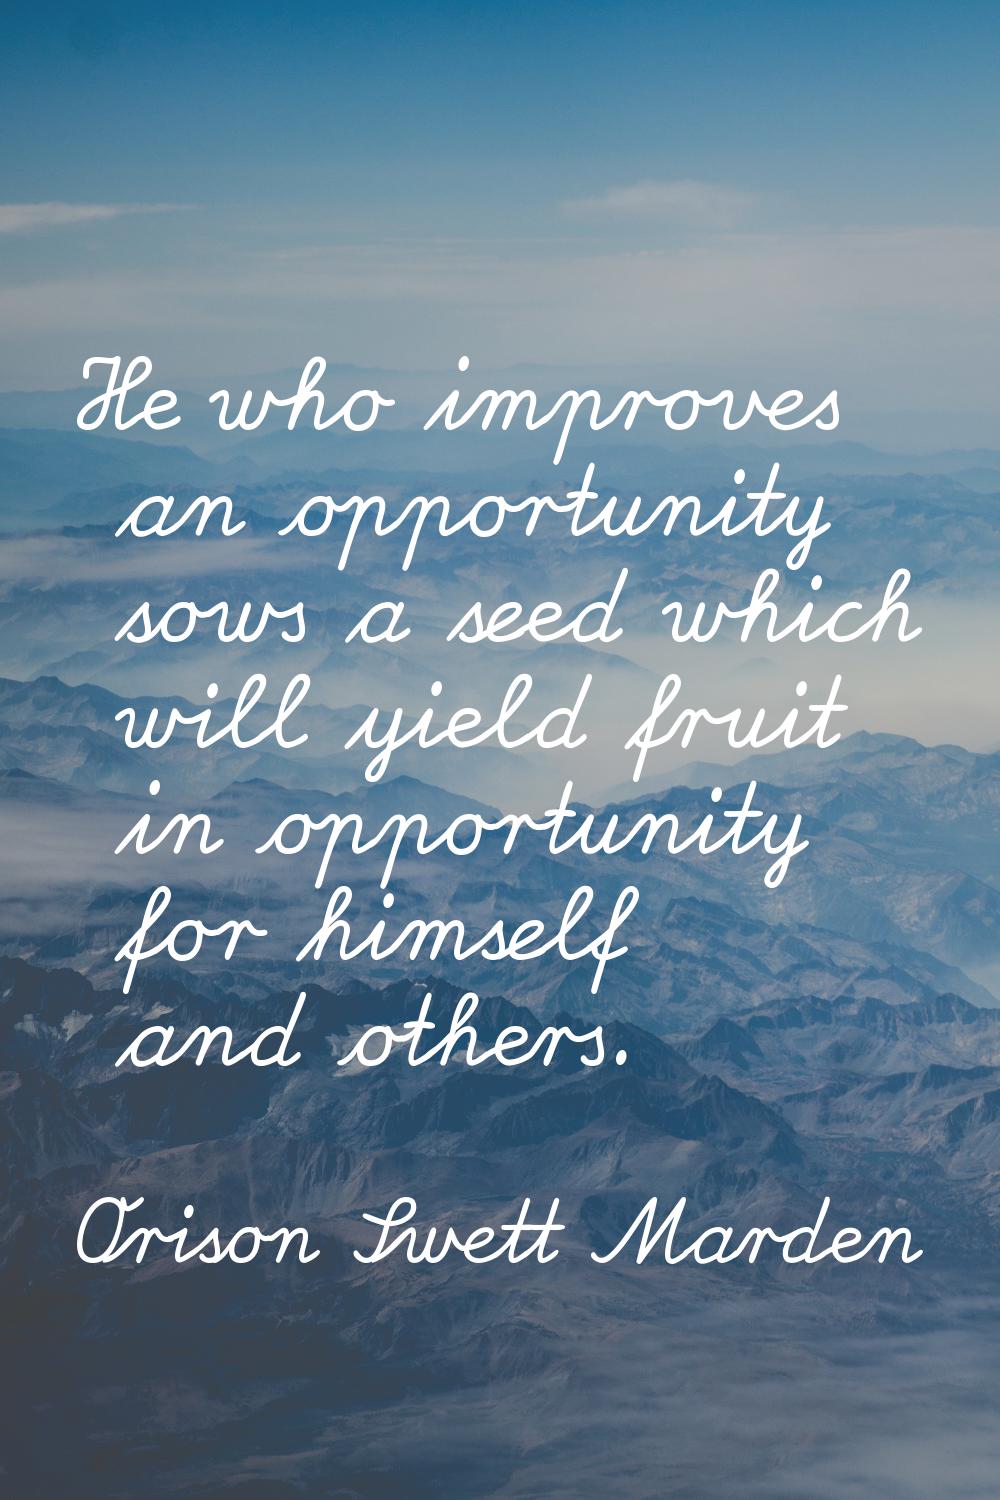 He who improves an opportunity sows a seed which will yield fruit in opportunity for himself and ot